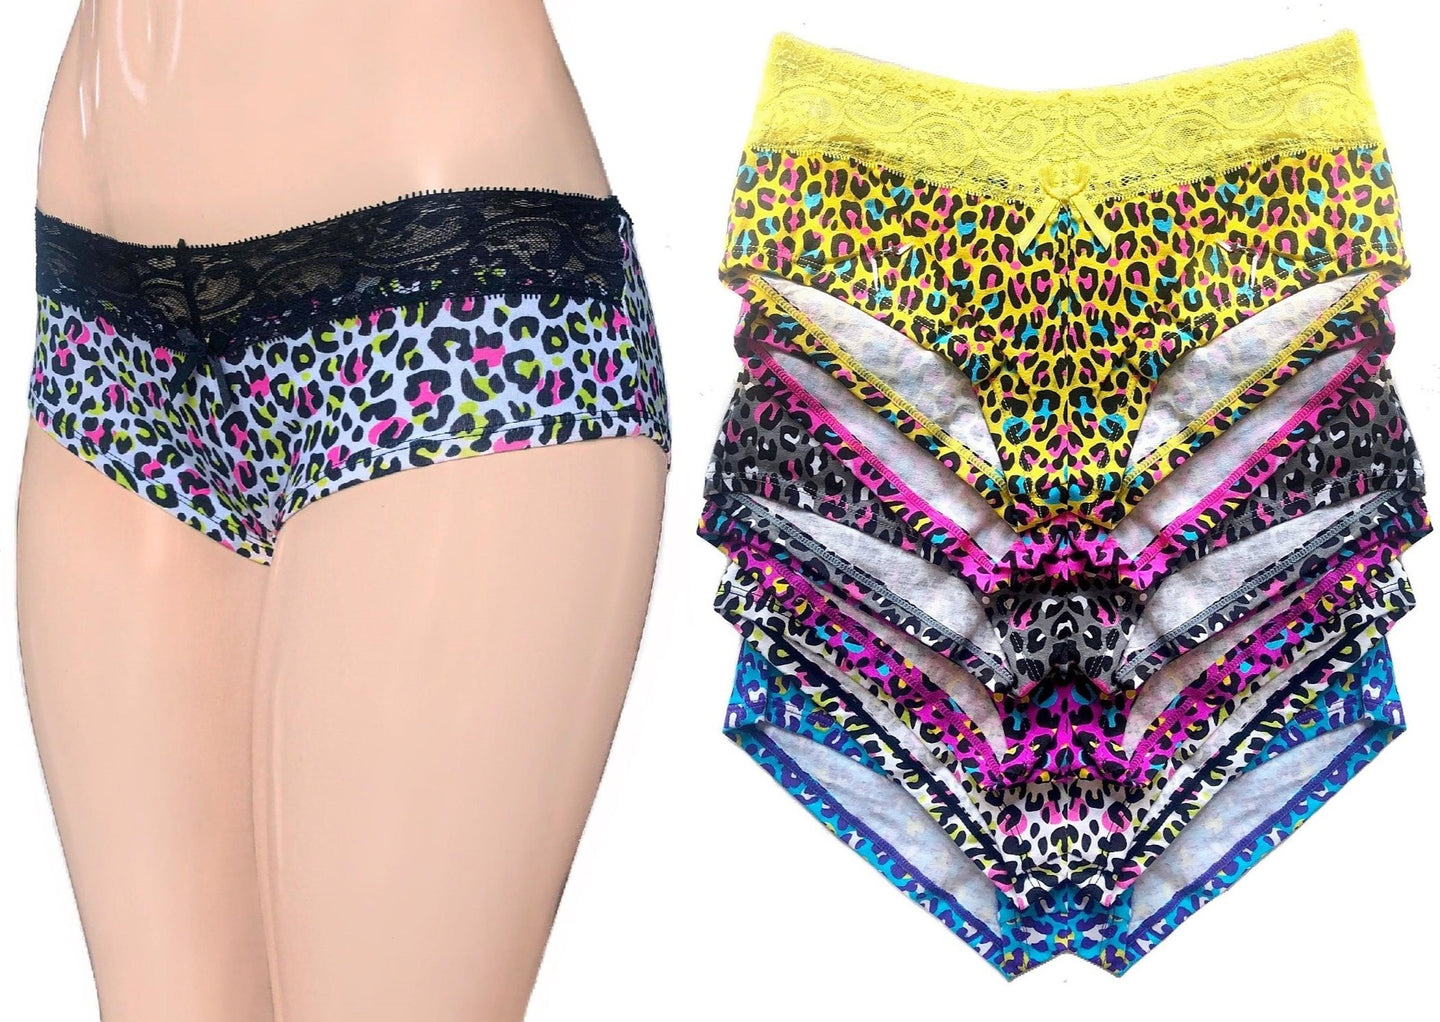 Colorful Animal & Lace Full Coverage Panties